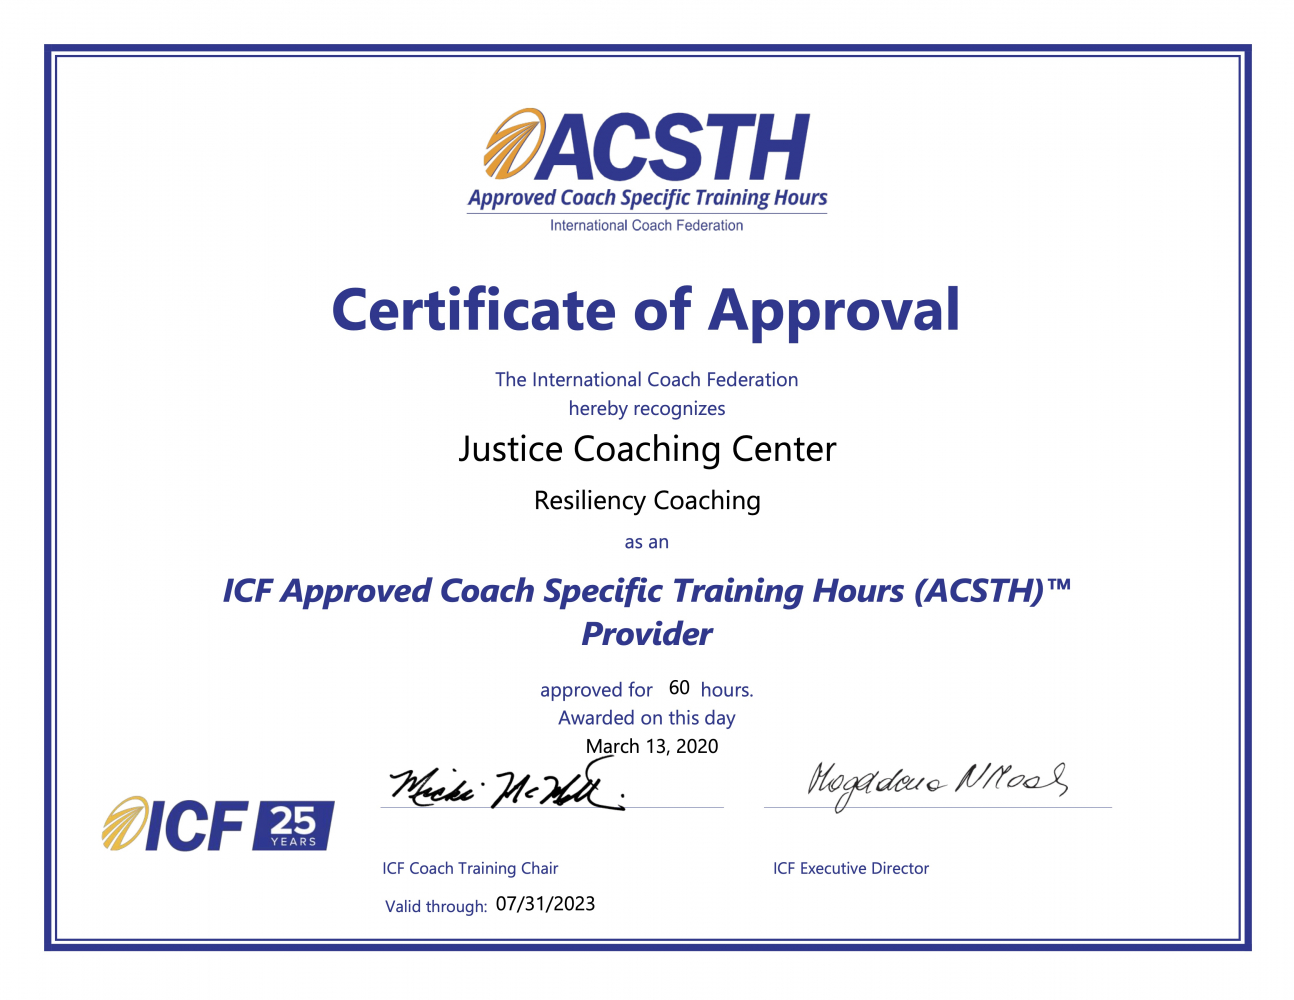 Justice Coaching Center ACSTH Certificate